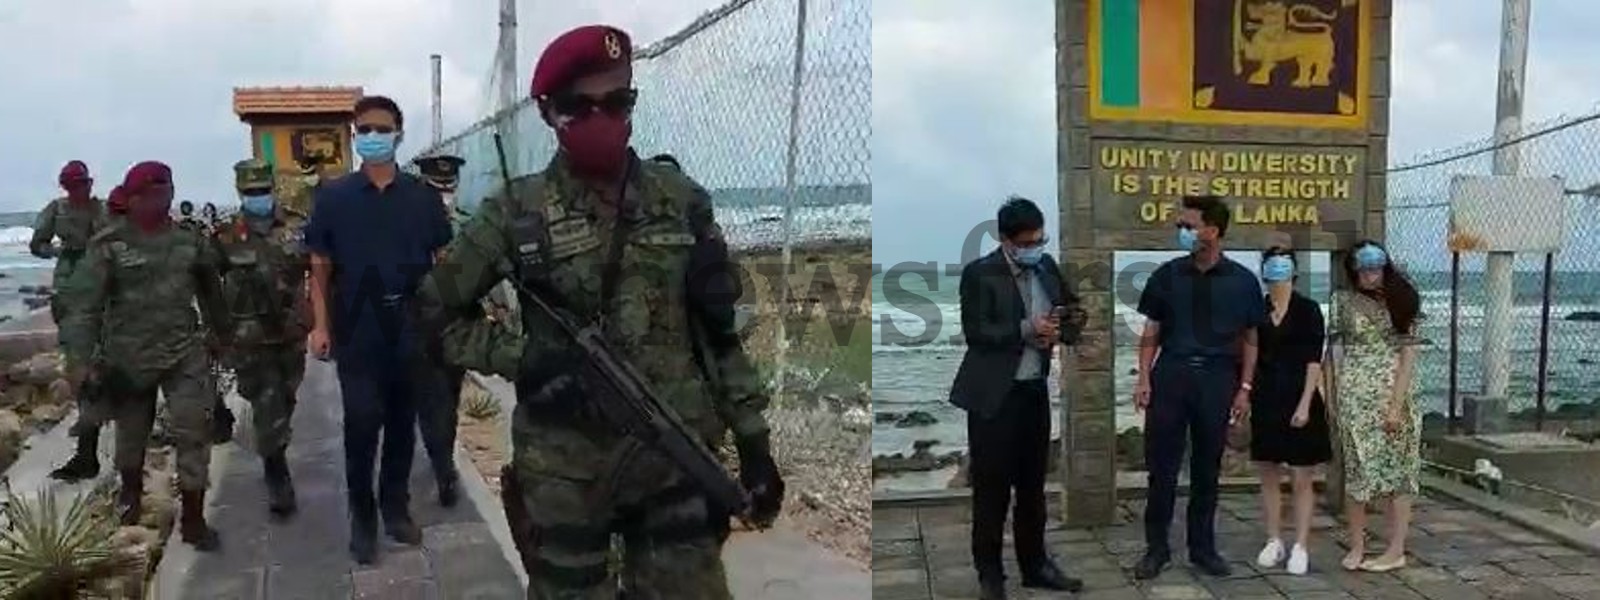 Analysis: “How far away is India from here”?, Chinese Ambassador at Point Pedro.